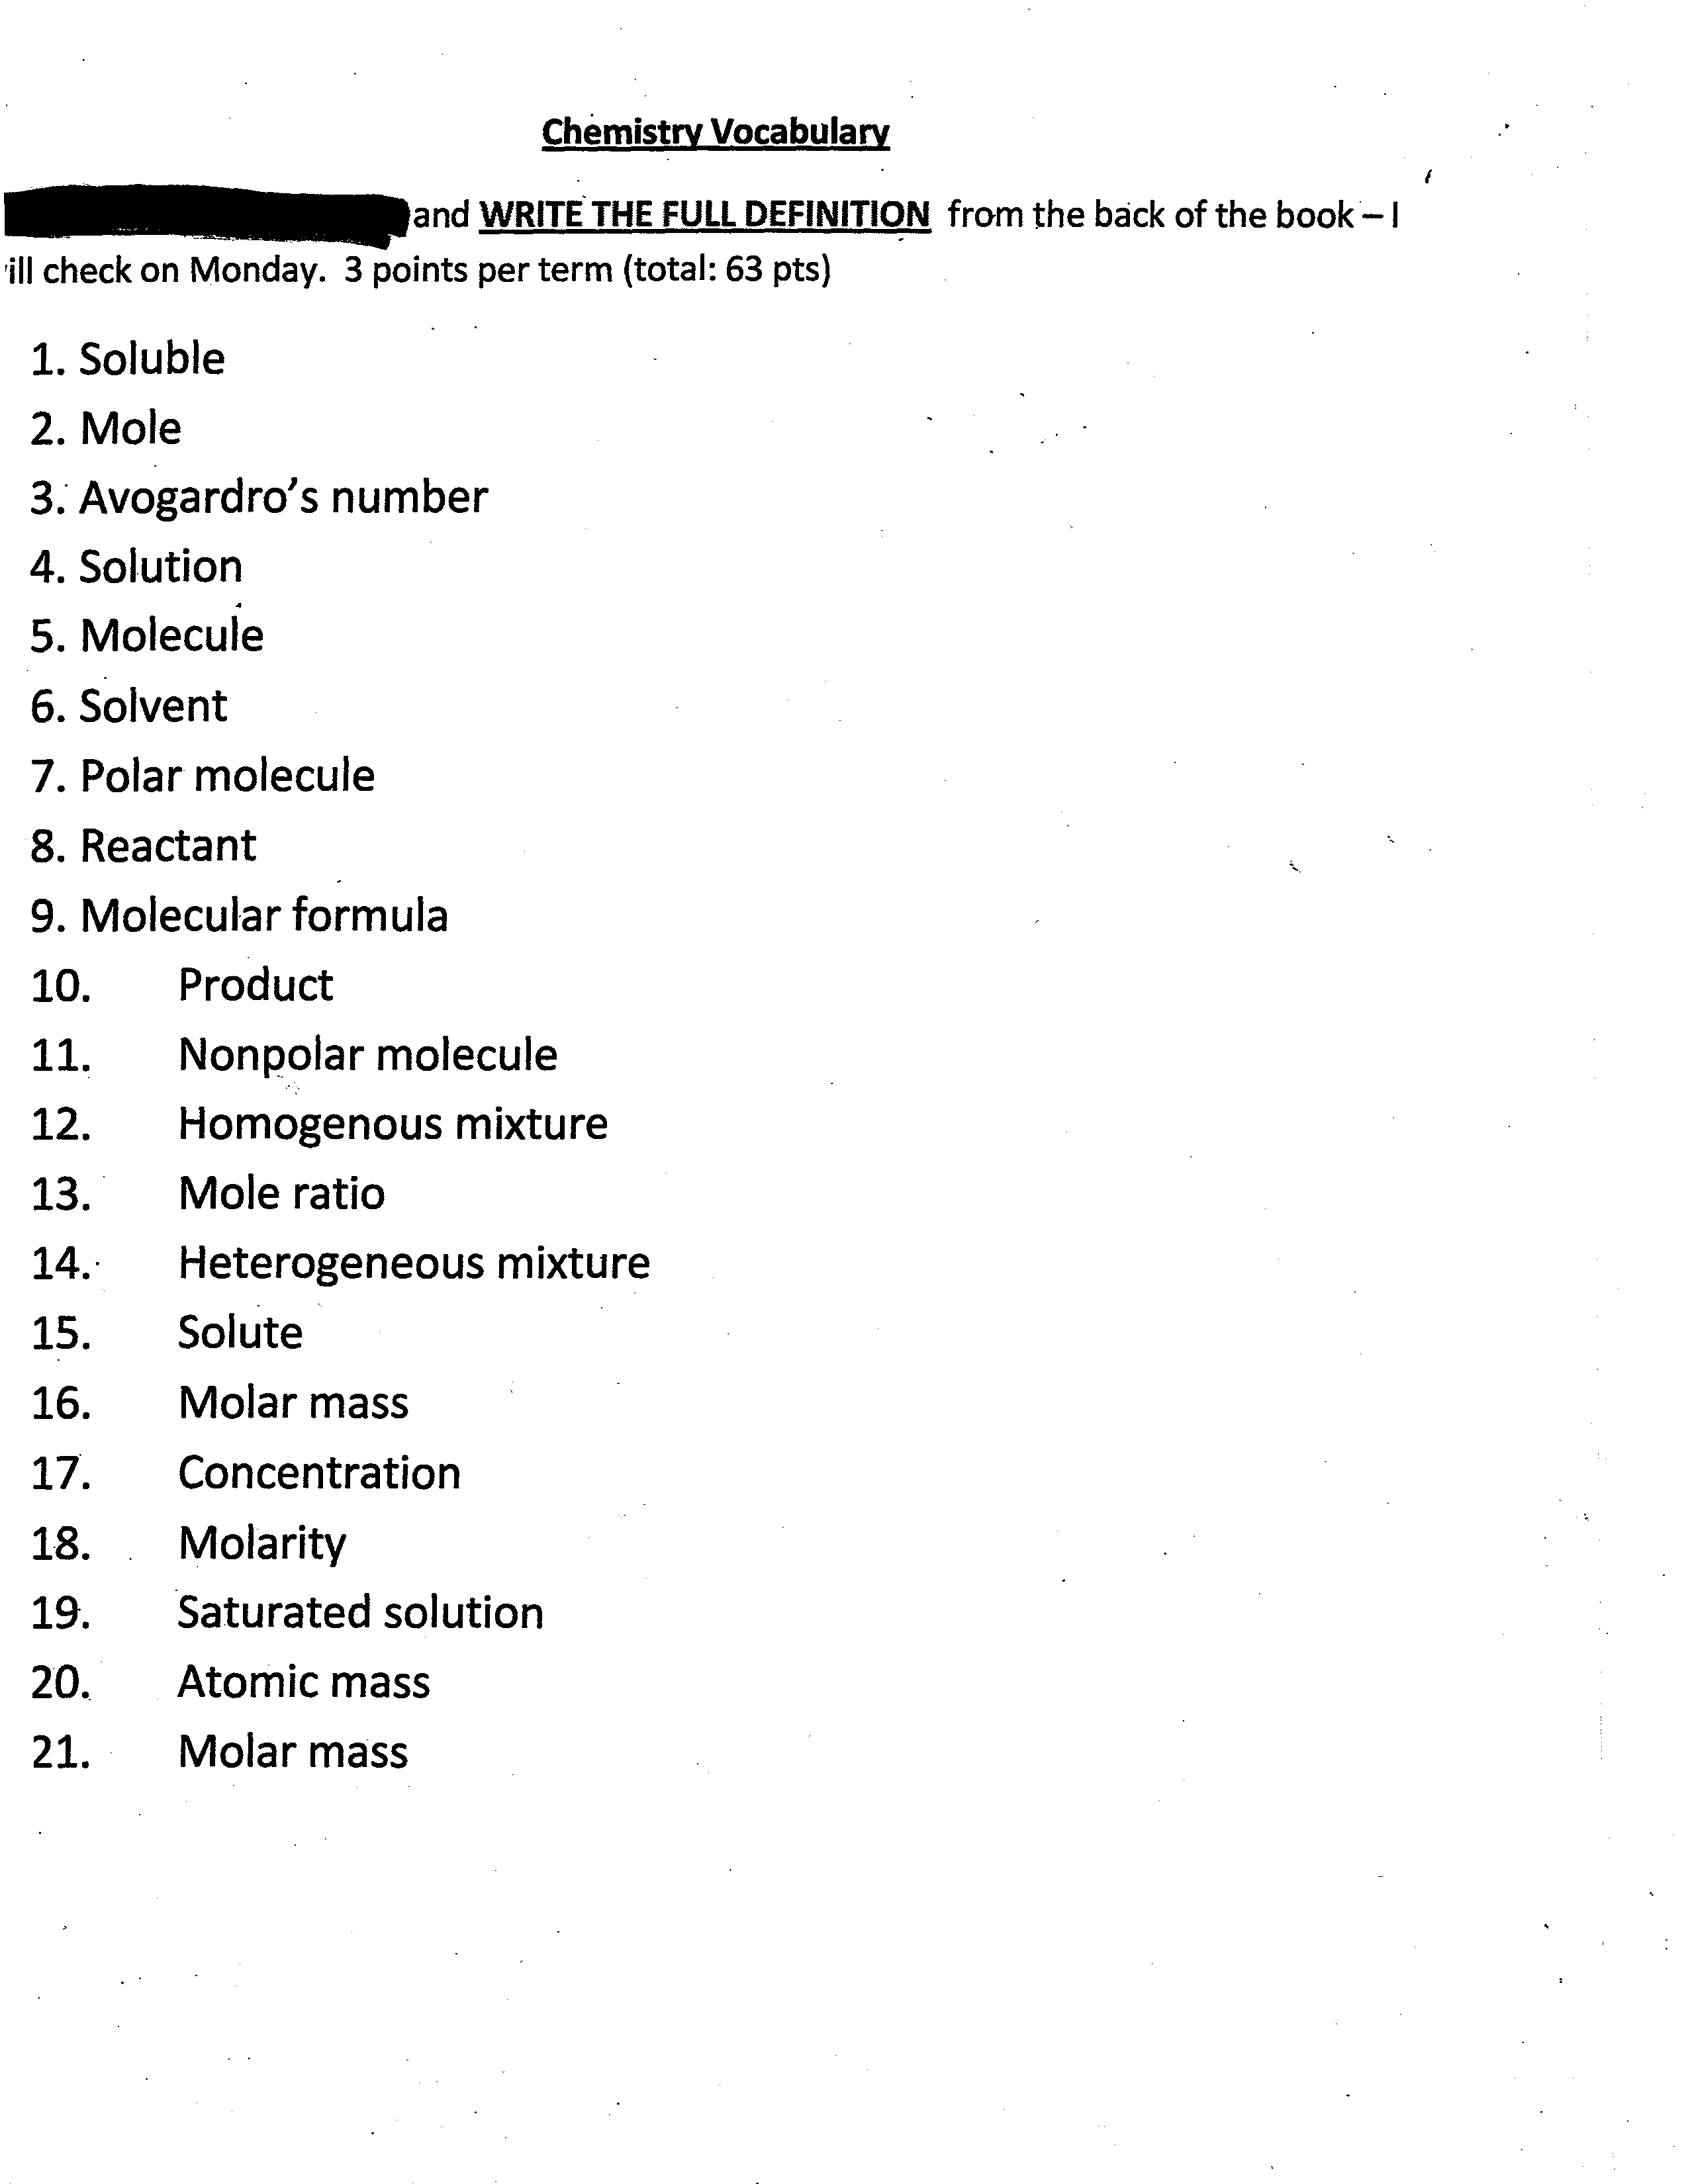 Metric Conversions Worksheet with Answers Image